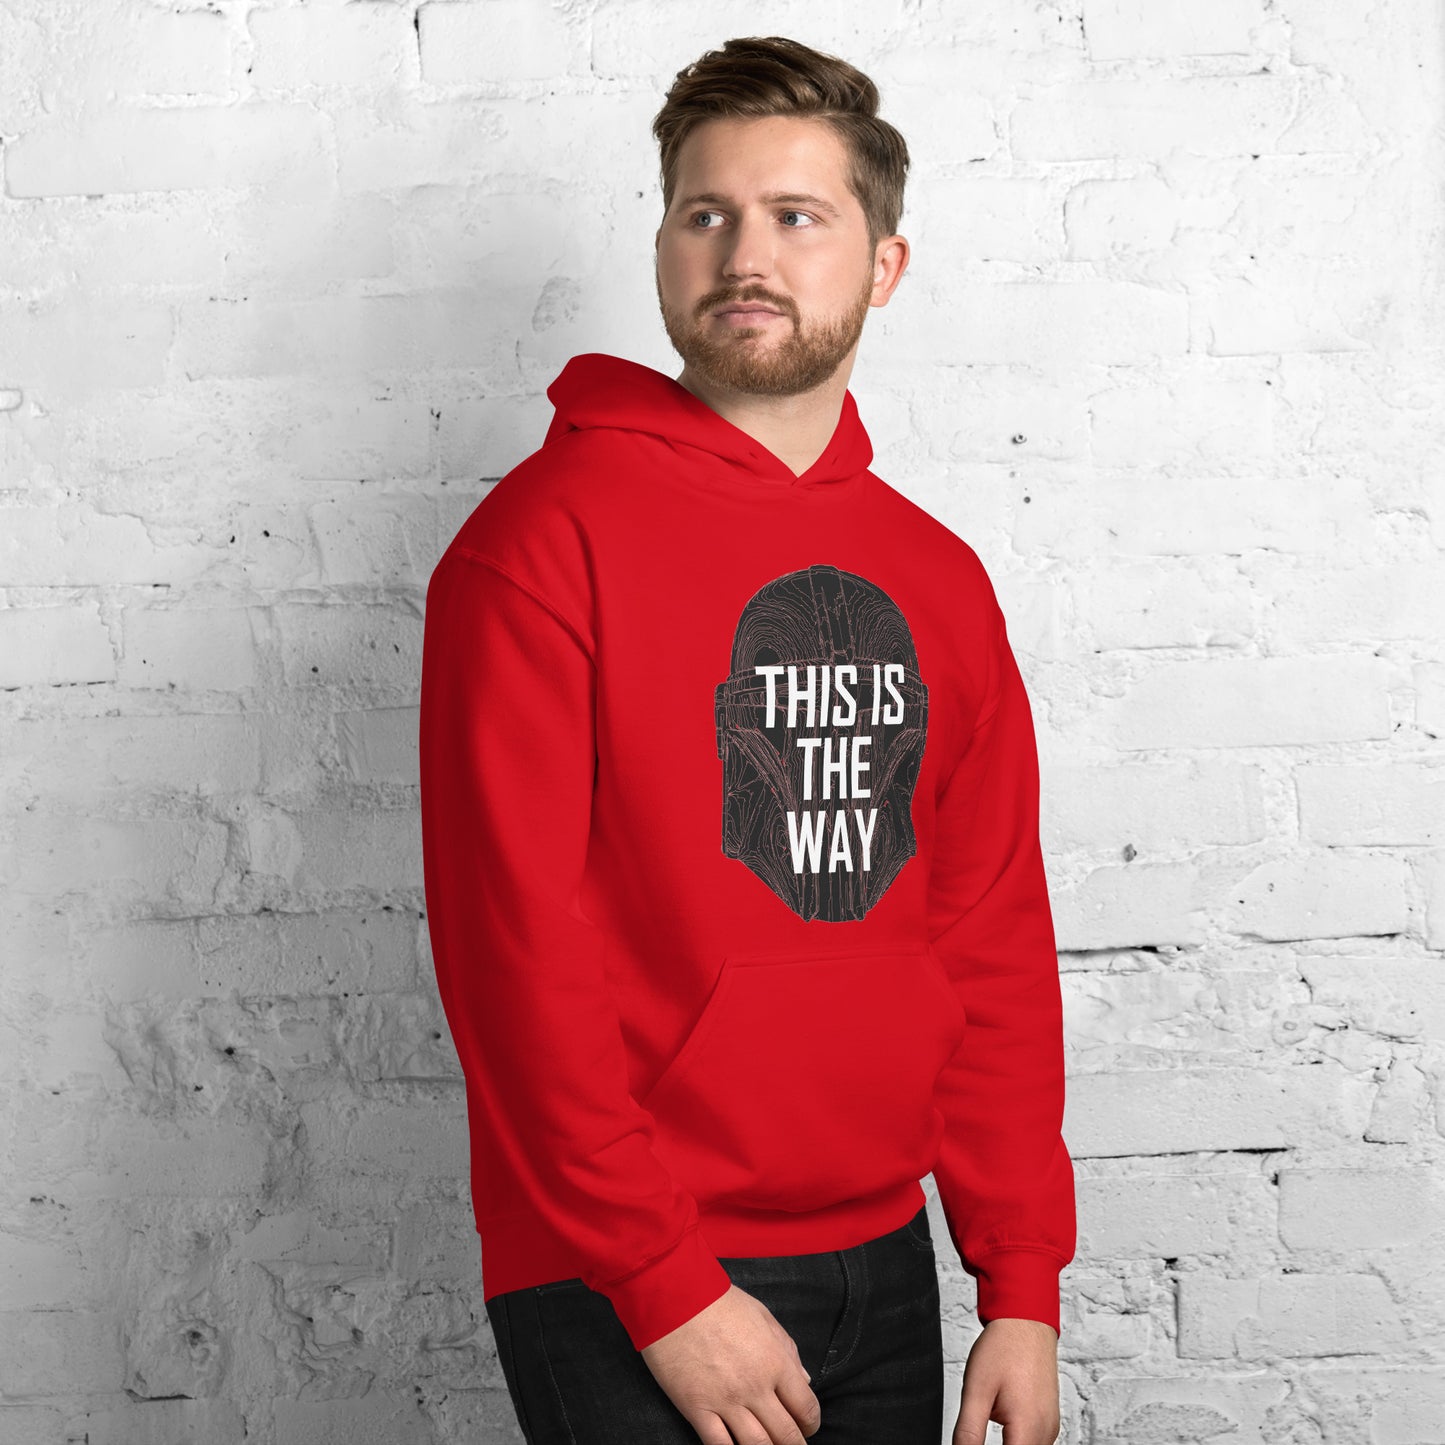 This is the Way - Unisex Hoodie